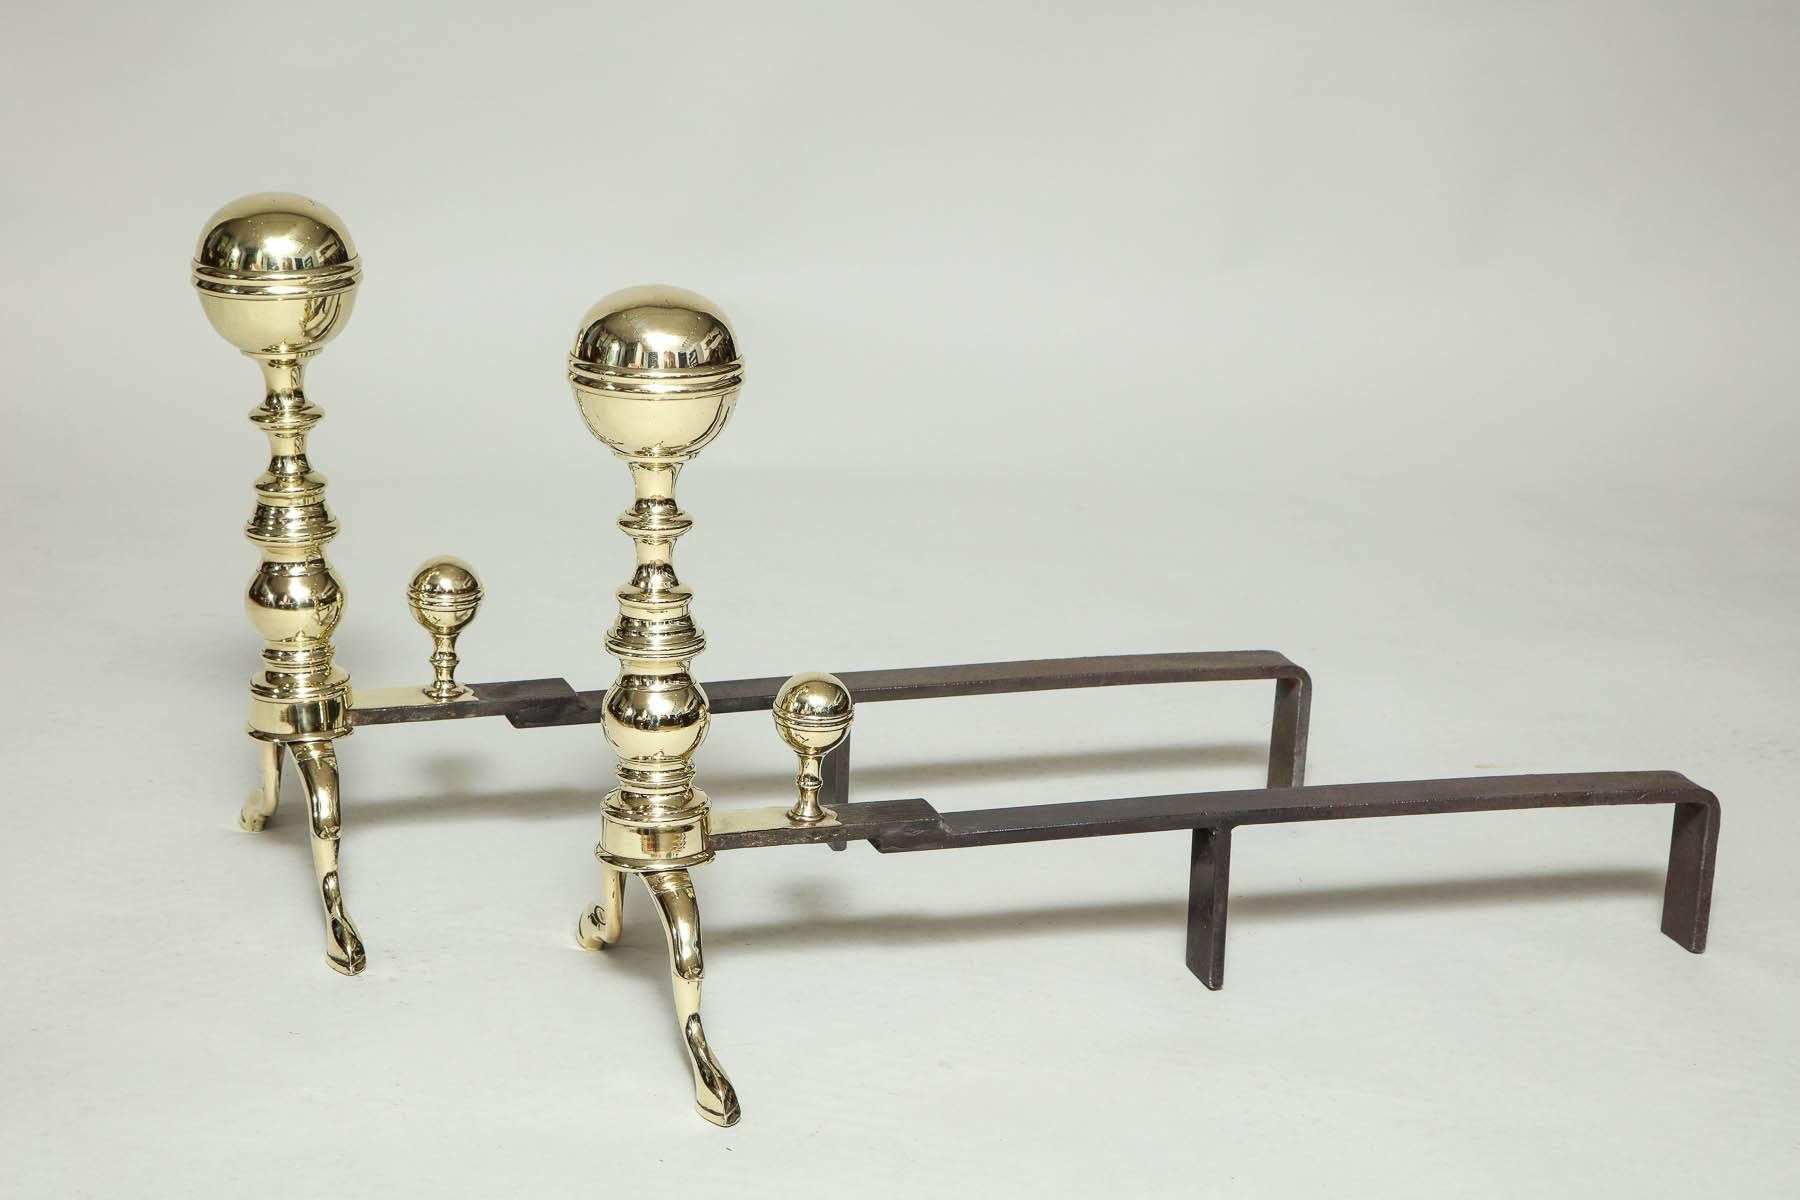 Pair of American Federal period brass andirons having canon ball finials with collar bands over ringed shafts and standing on spurred slipper feet, recently polished.